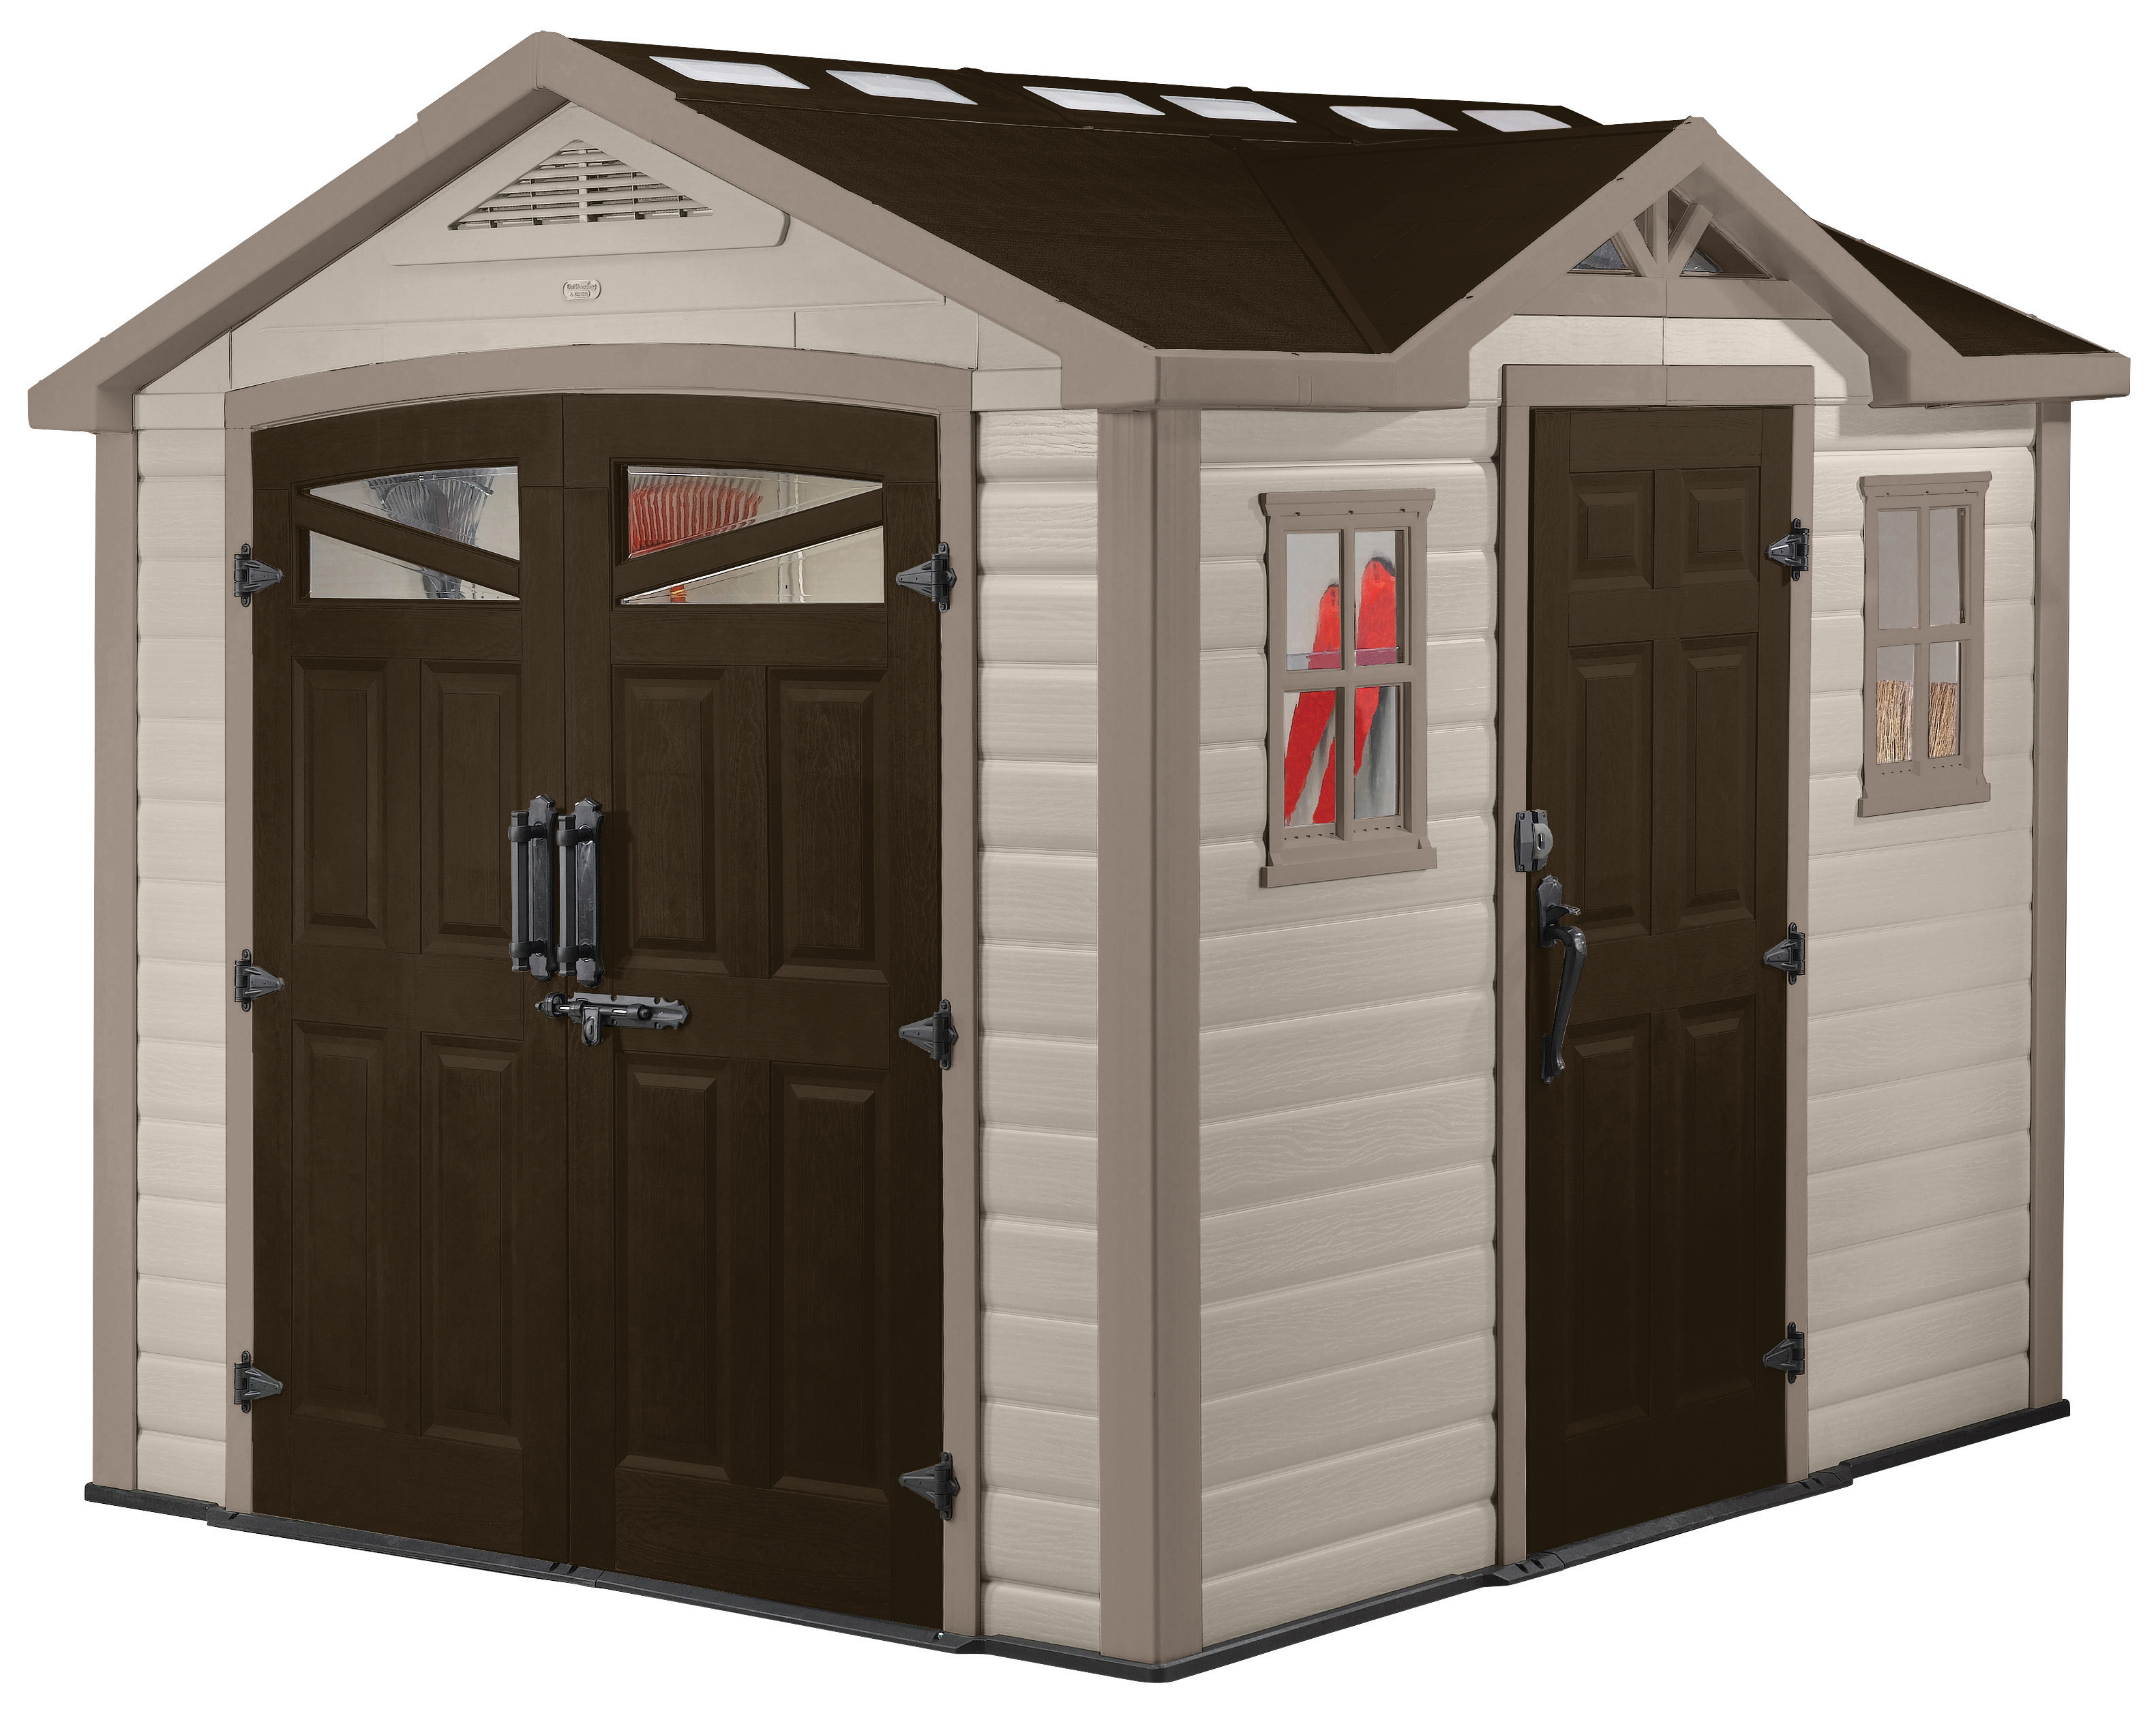 Keter Shed 6x4 Beautiful Outdoor Garden Plastic Storage Sheds Keter